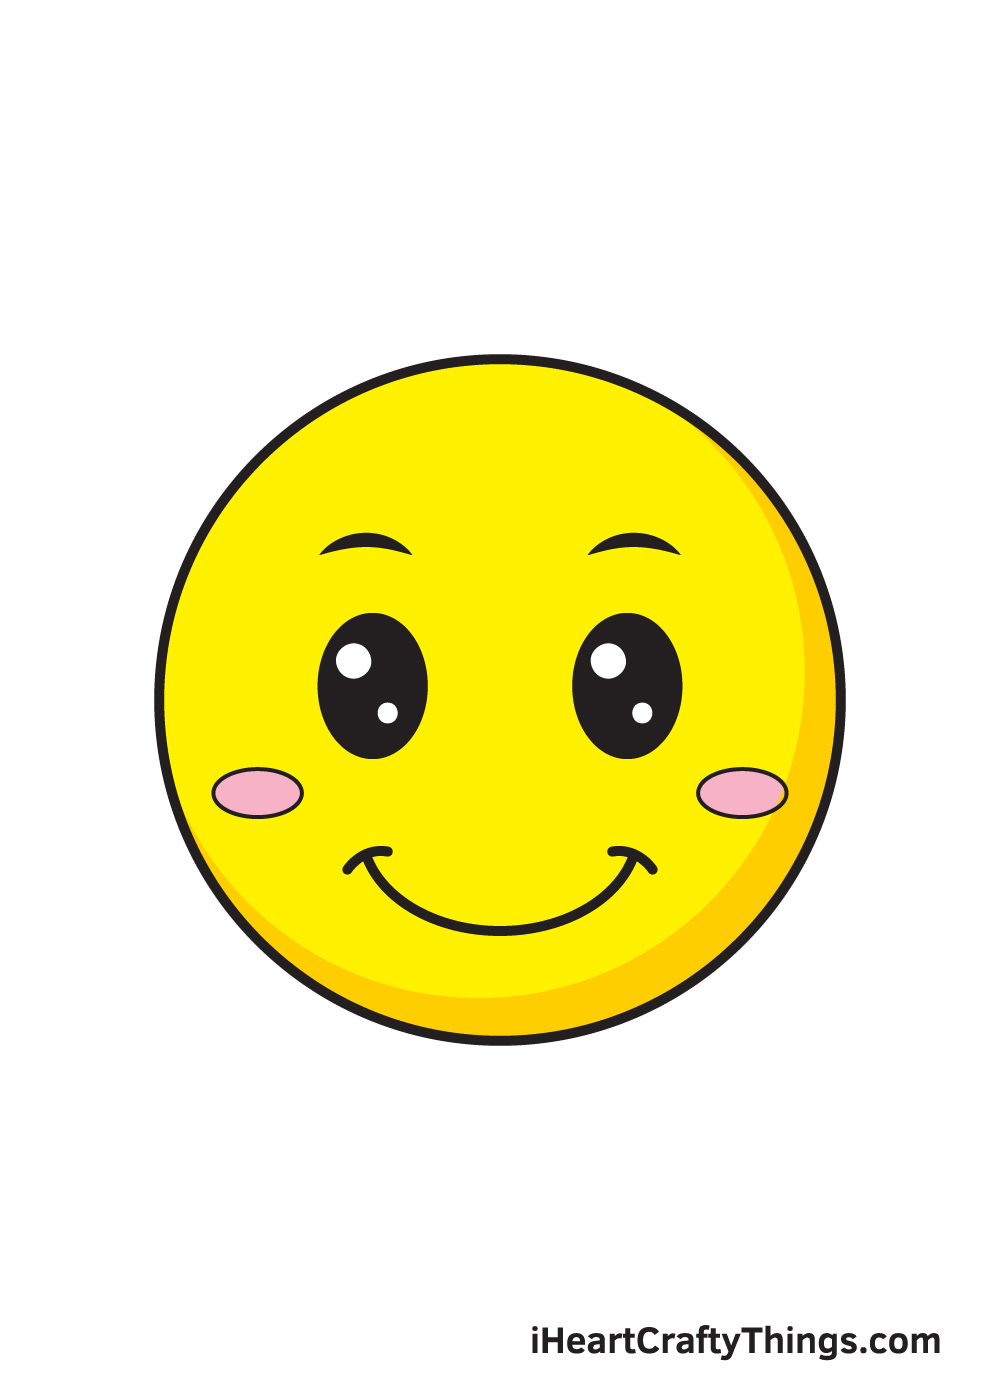 Smiley face png images | PNGEgg